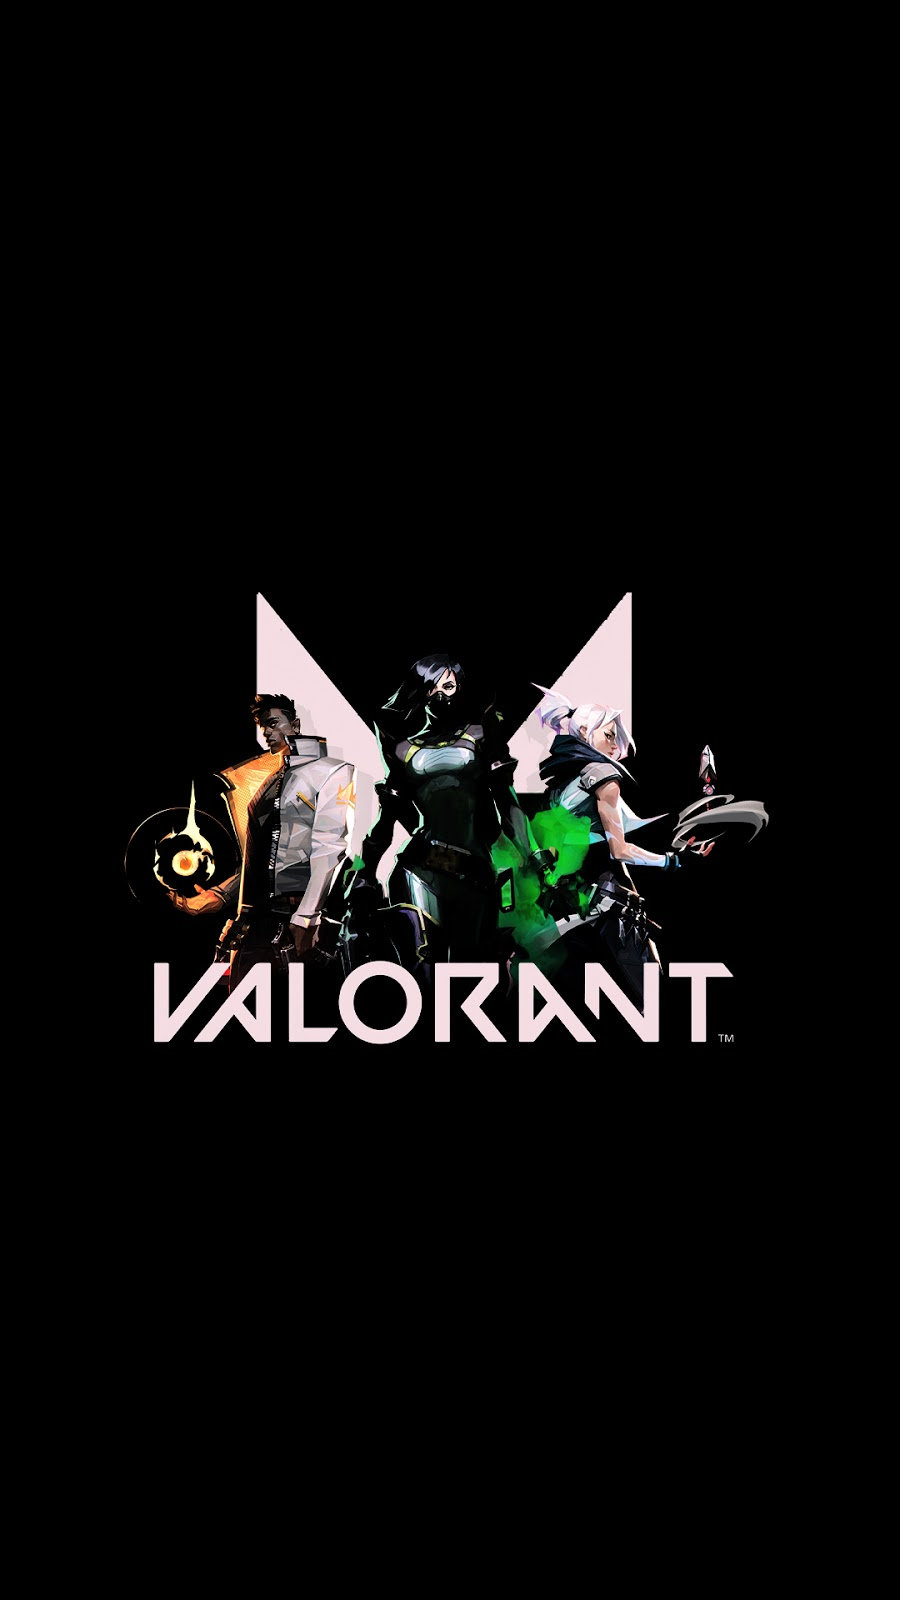 Valorant wallpaper for mobile. Mobile wallpaper, Dont touch my phone wallpaper, Gaming wallpaper